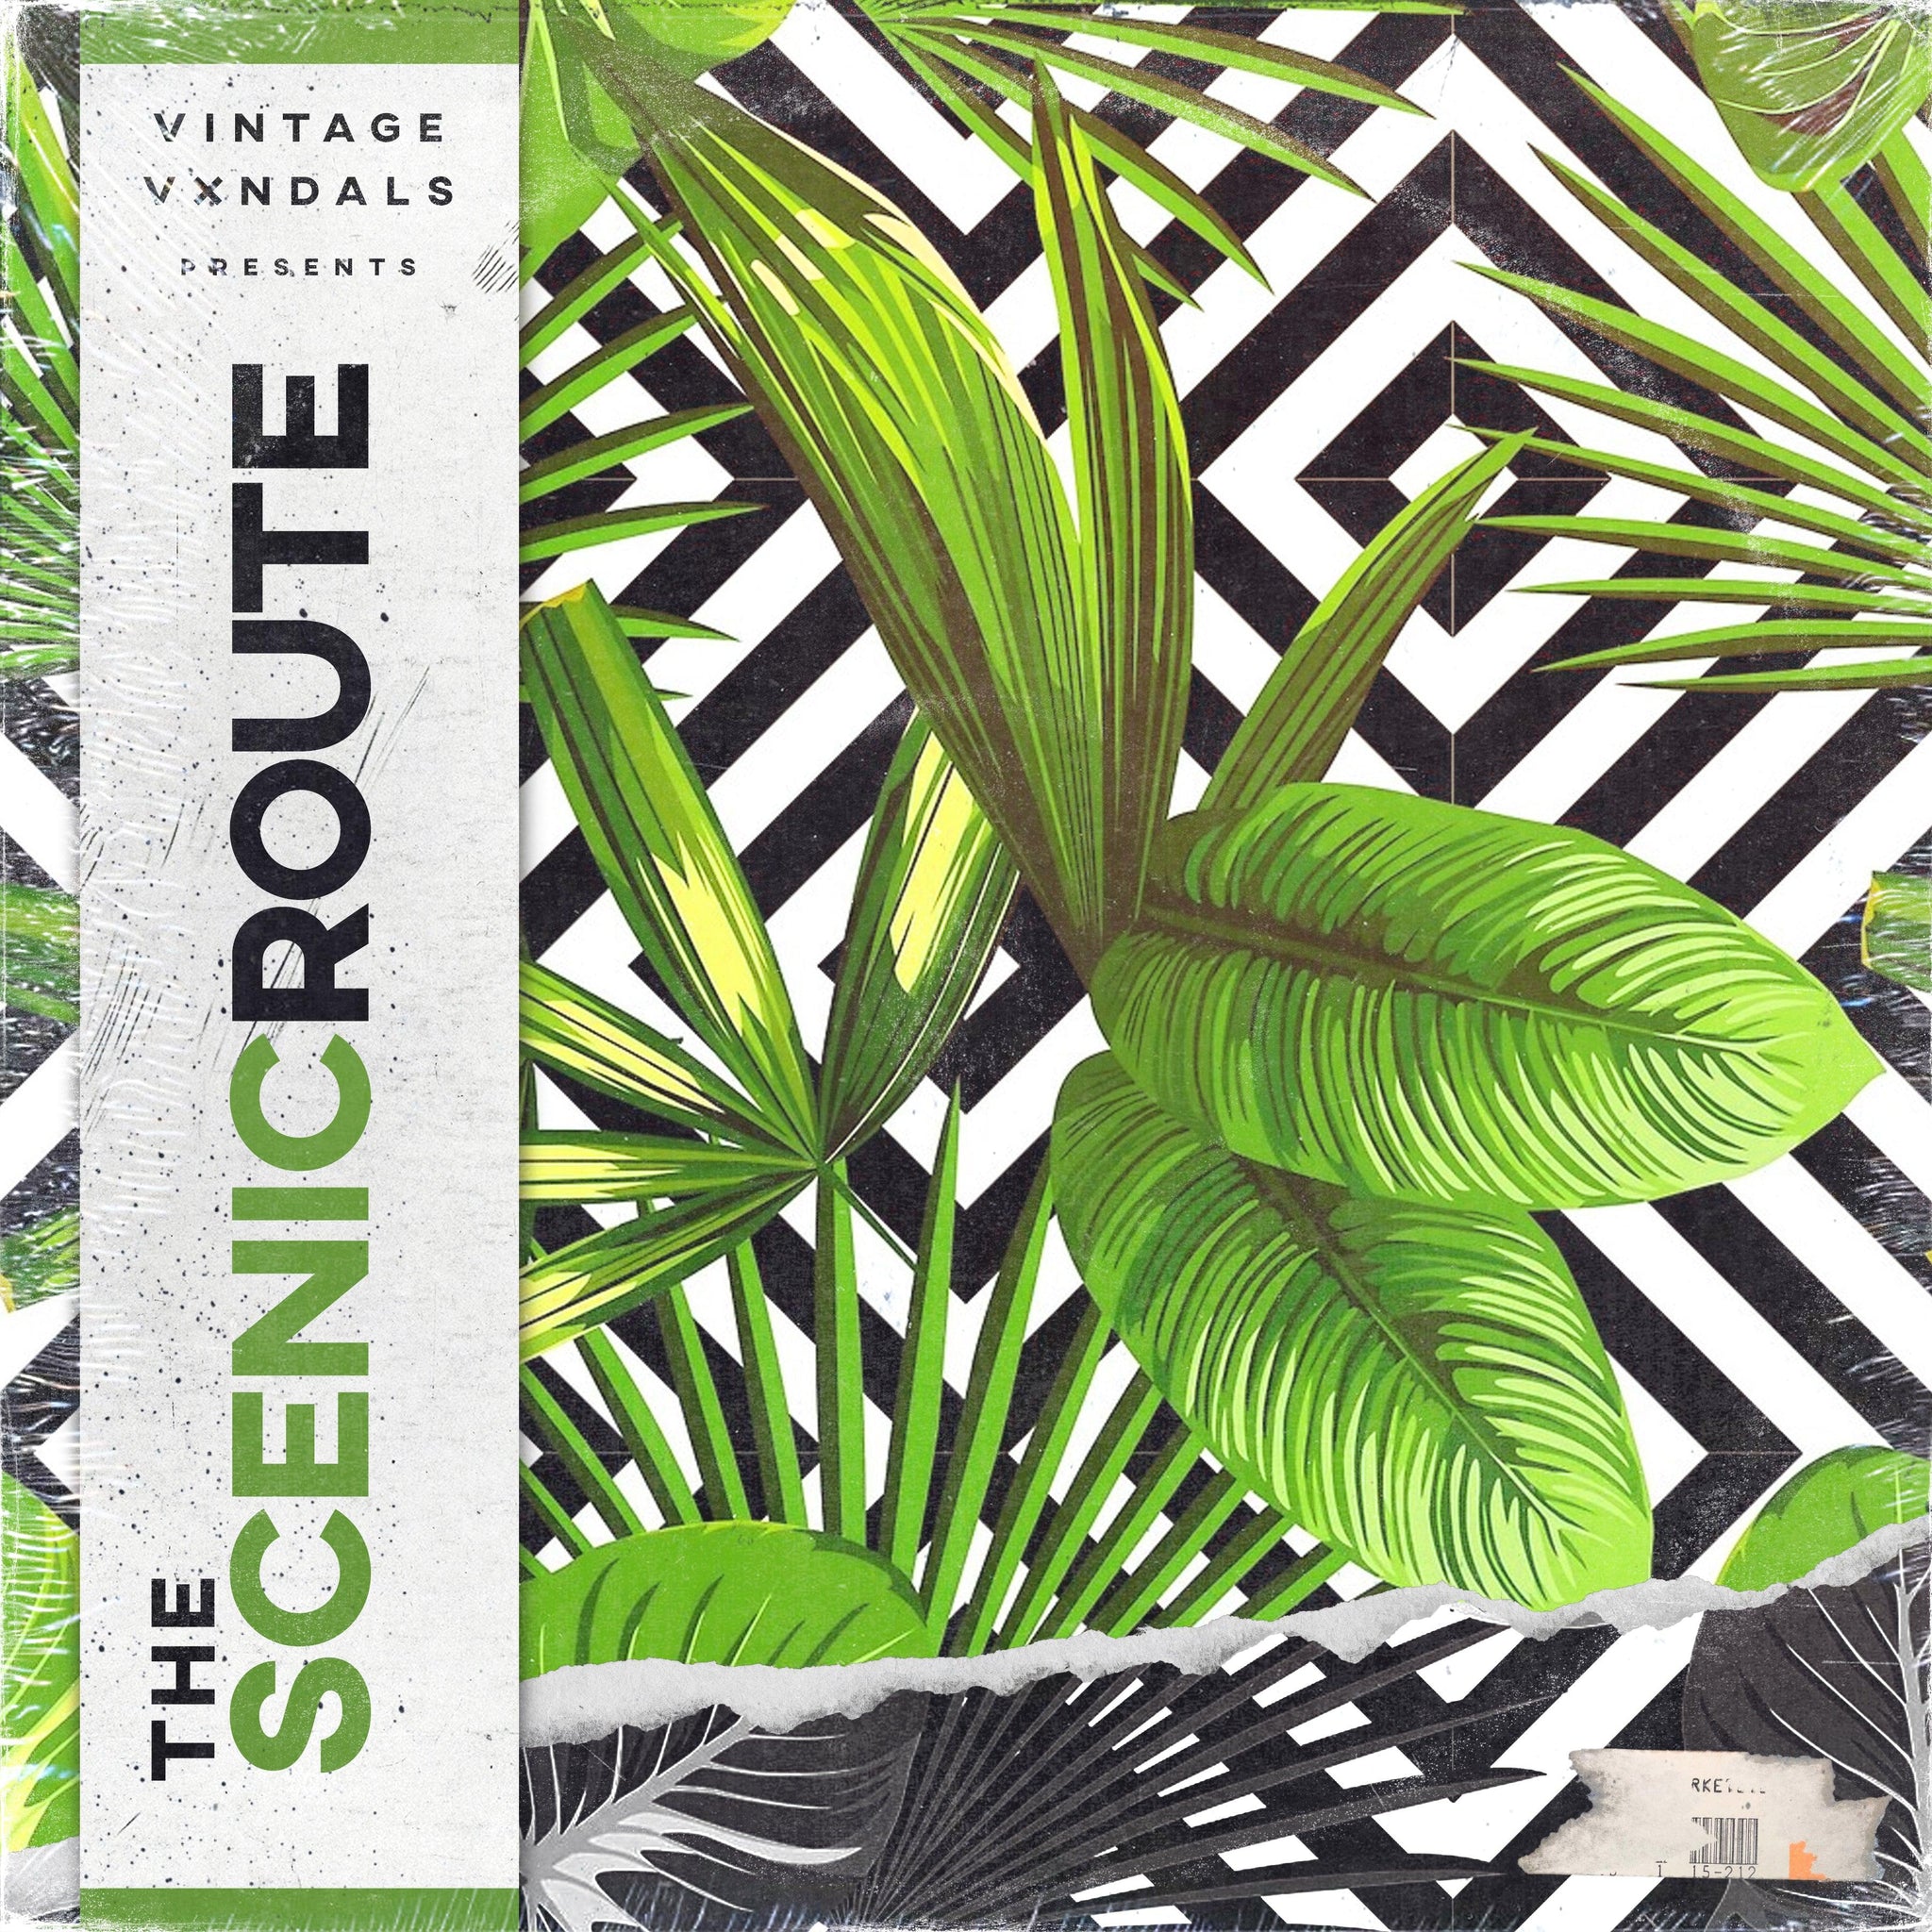 The Vintage Vxndals - The Scenic Route - The Sample Lab